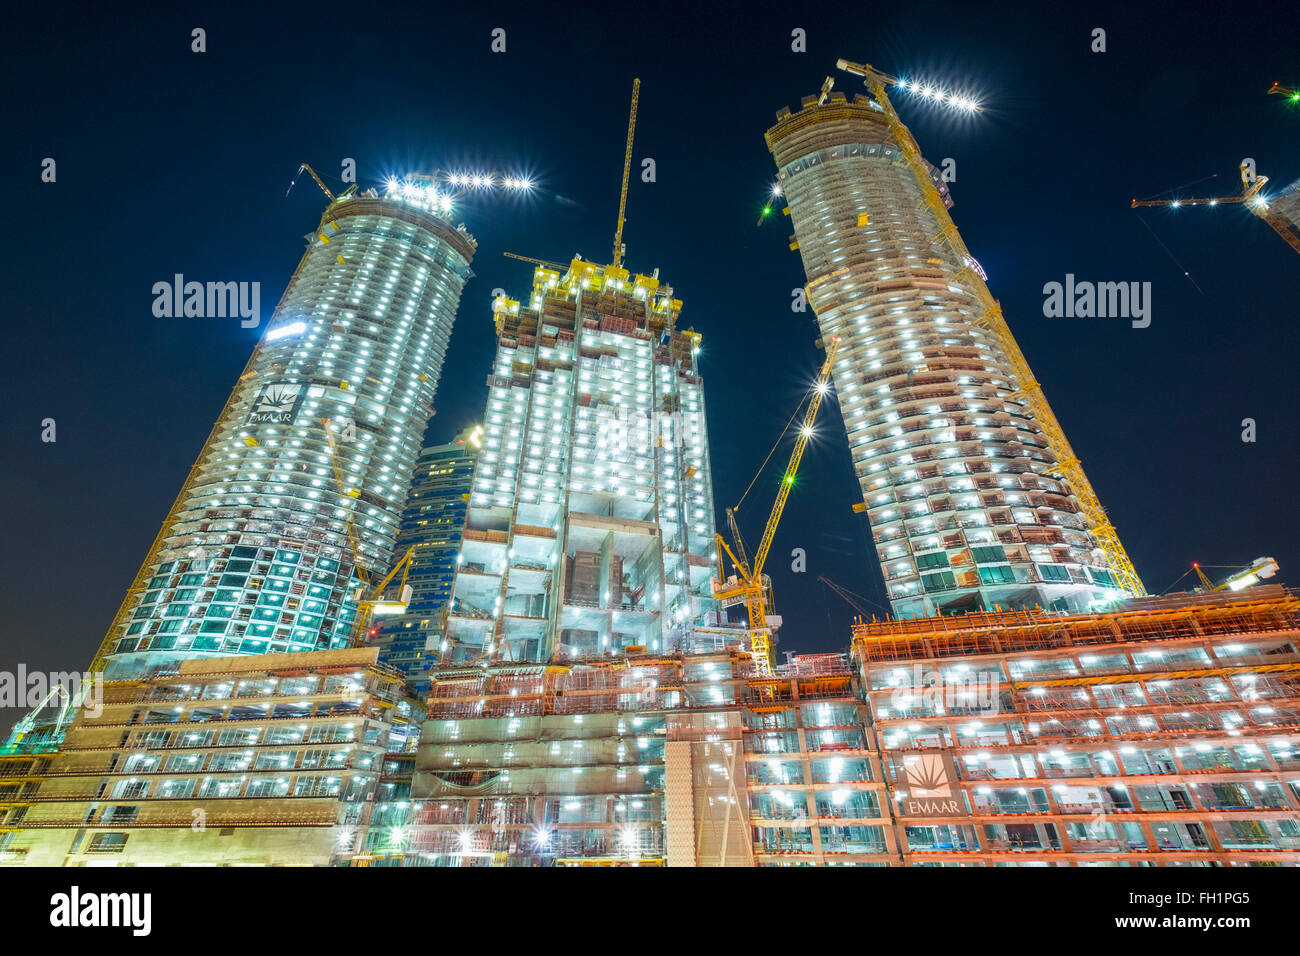 Night view of construction site of new high-rise luxury apartment towers in Dubai United Arab Emirates Stock Photo